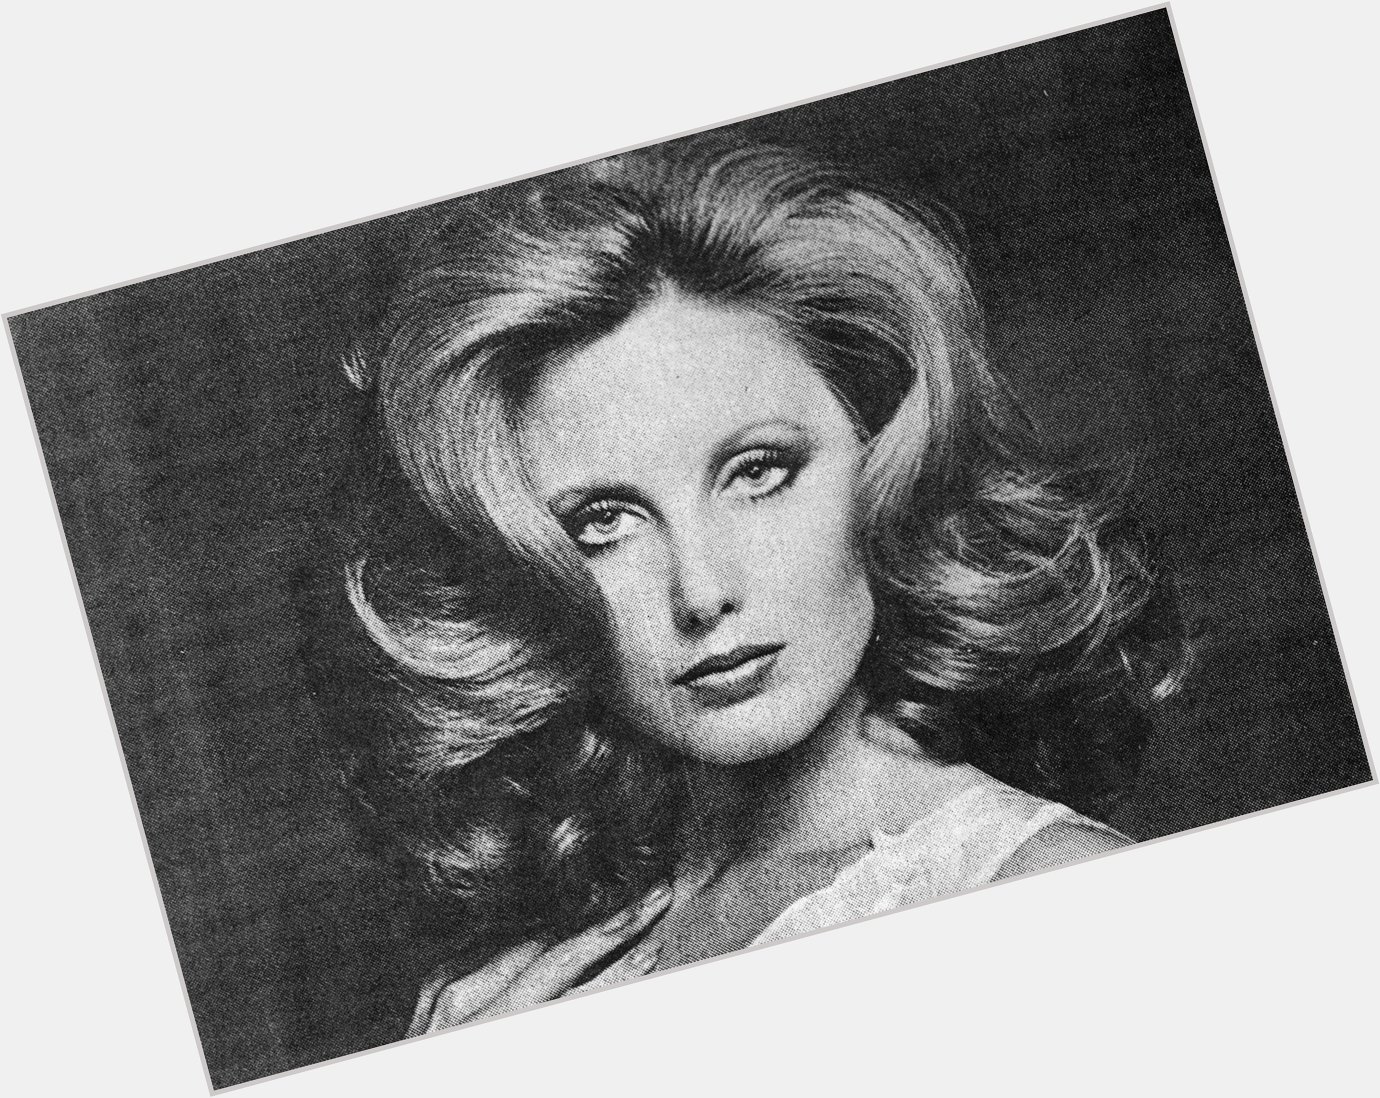 Happy Birthday Morgan Fairchild from your most devoted fan Hope it\s a great one! 